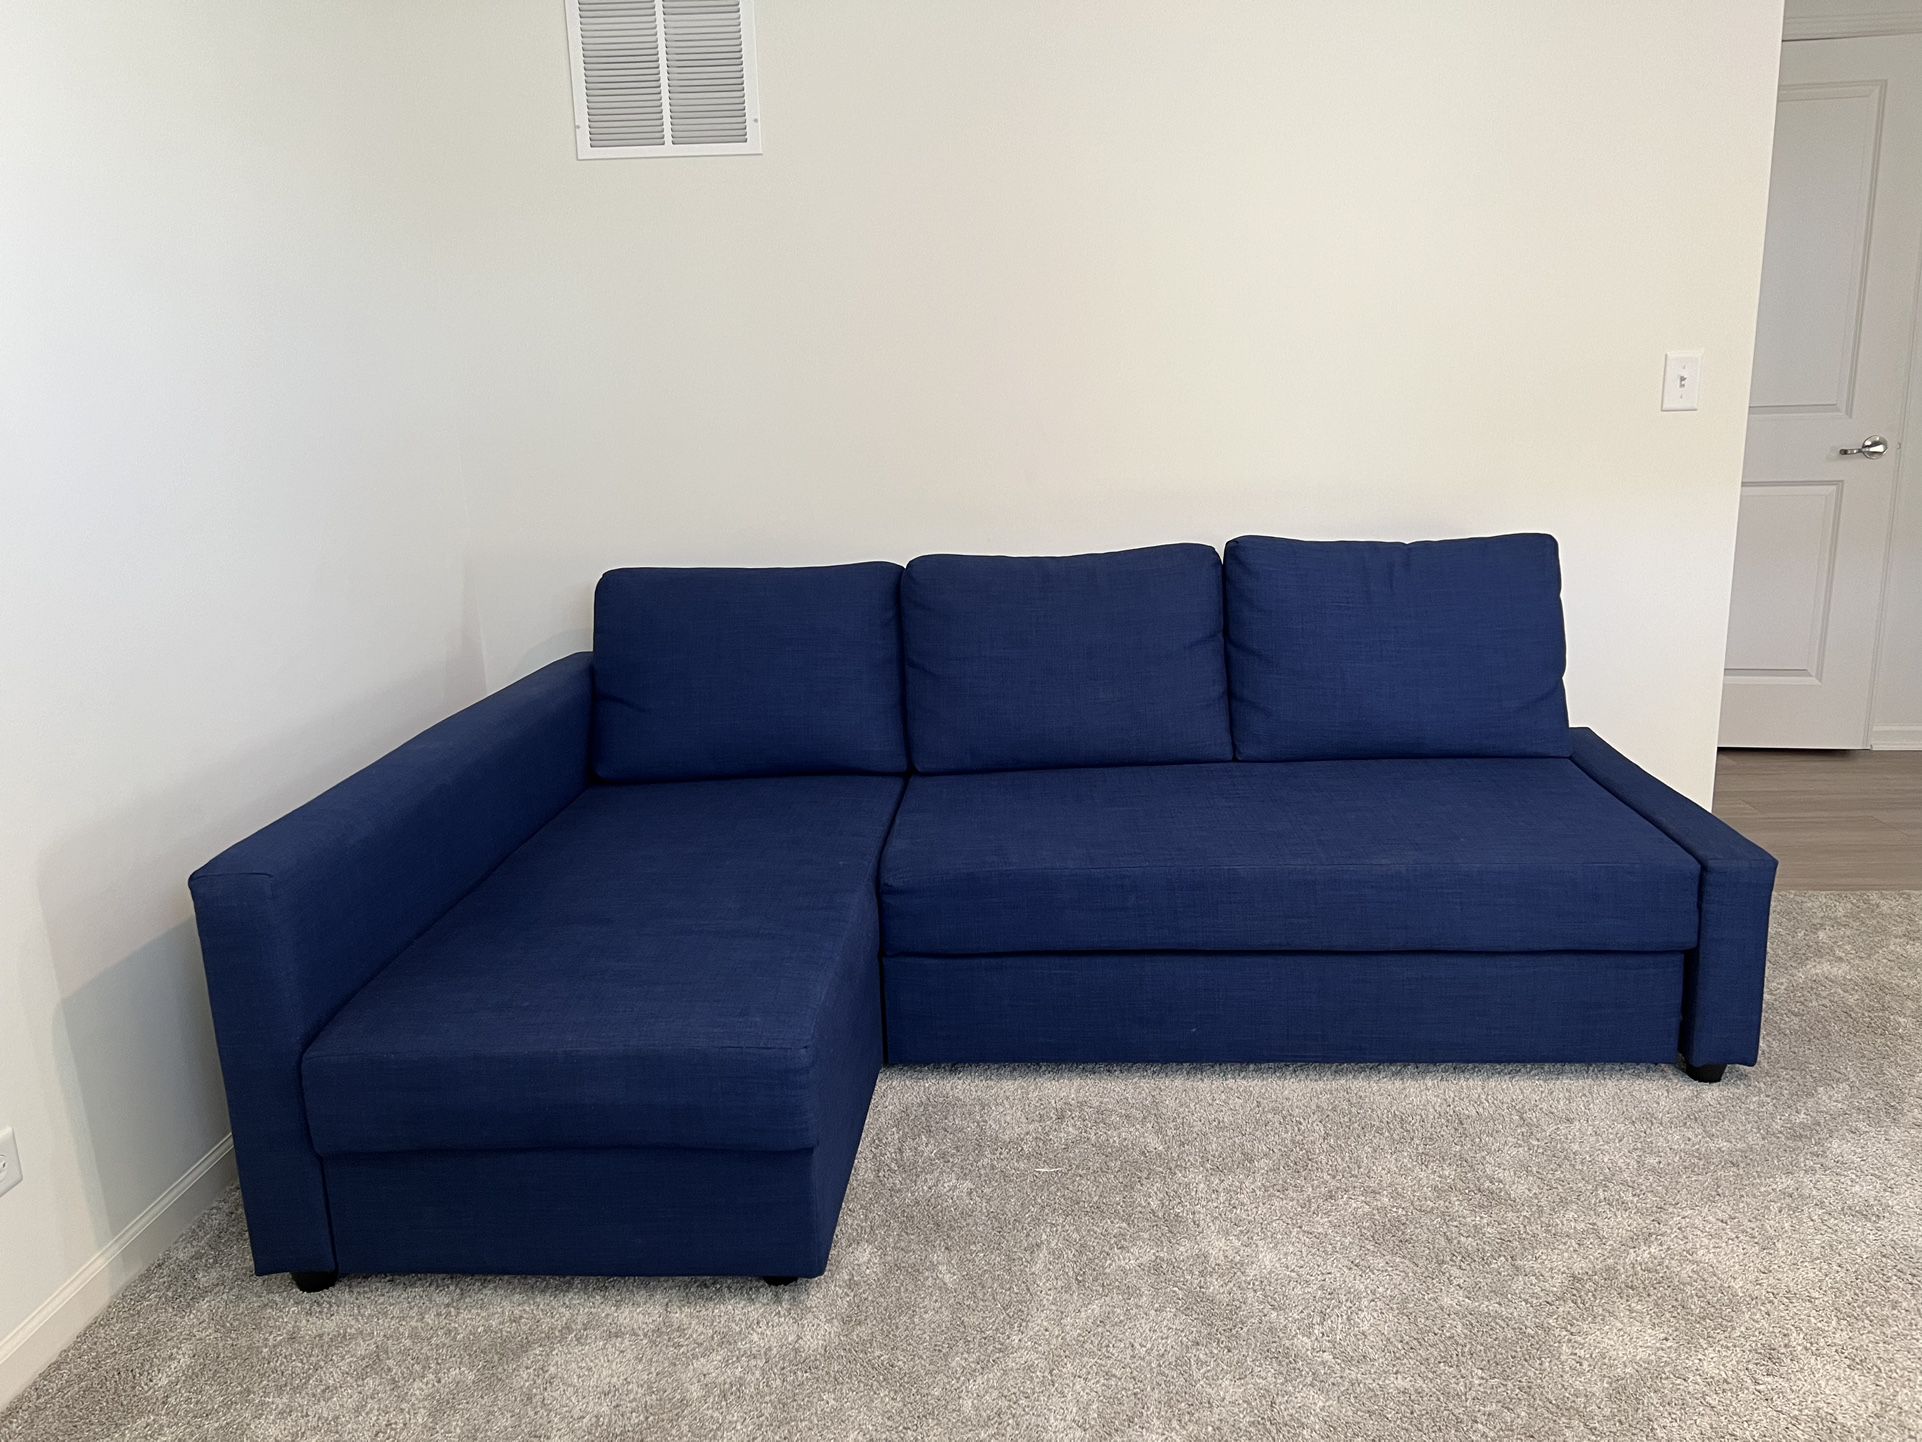 Couch - Sleeper Sectional, 3 Seat With Storage